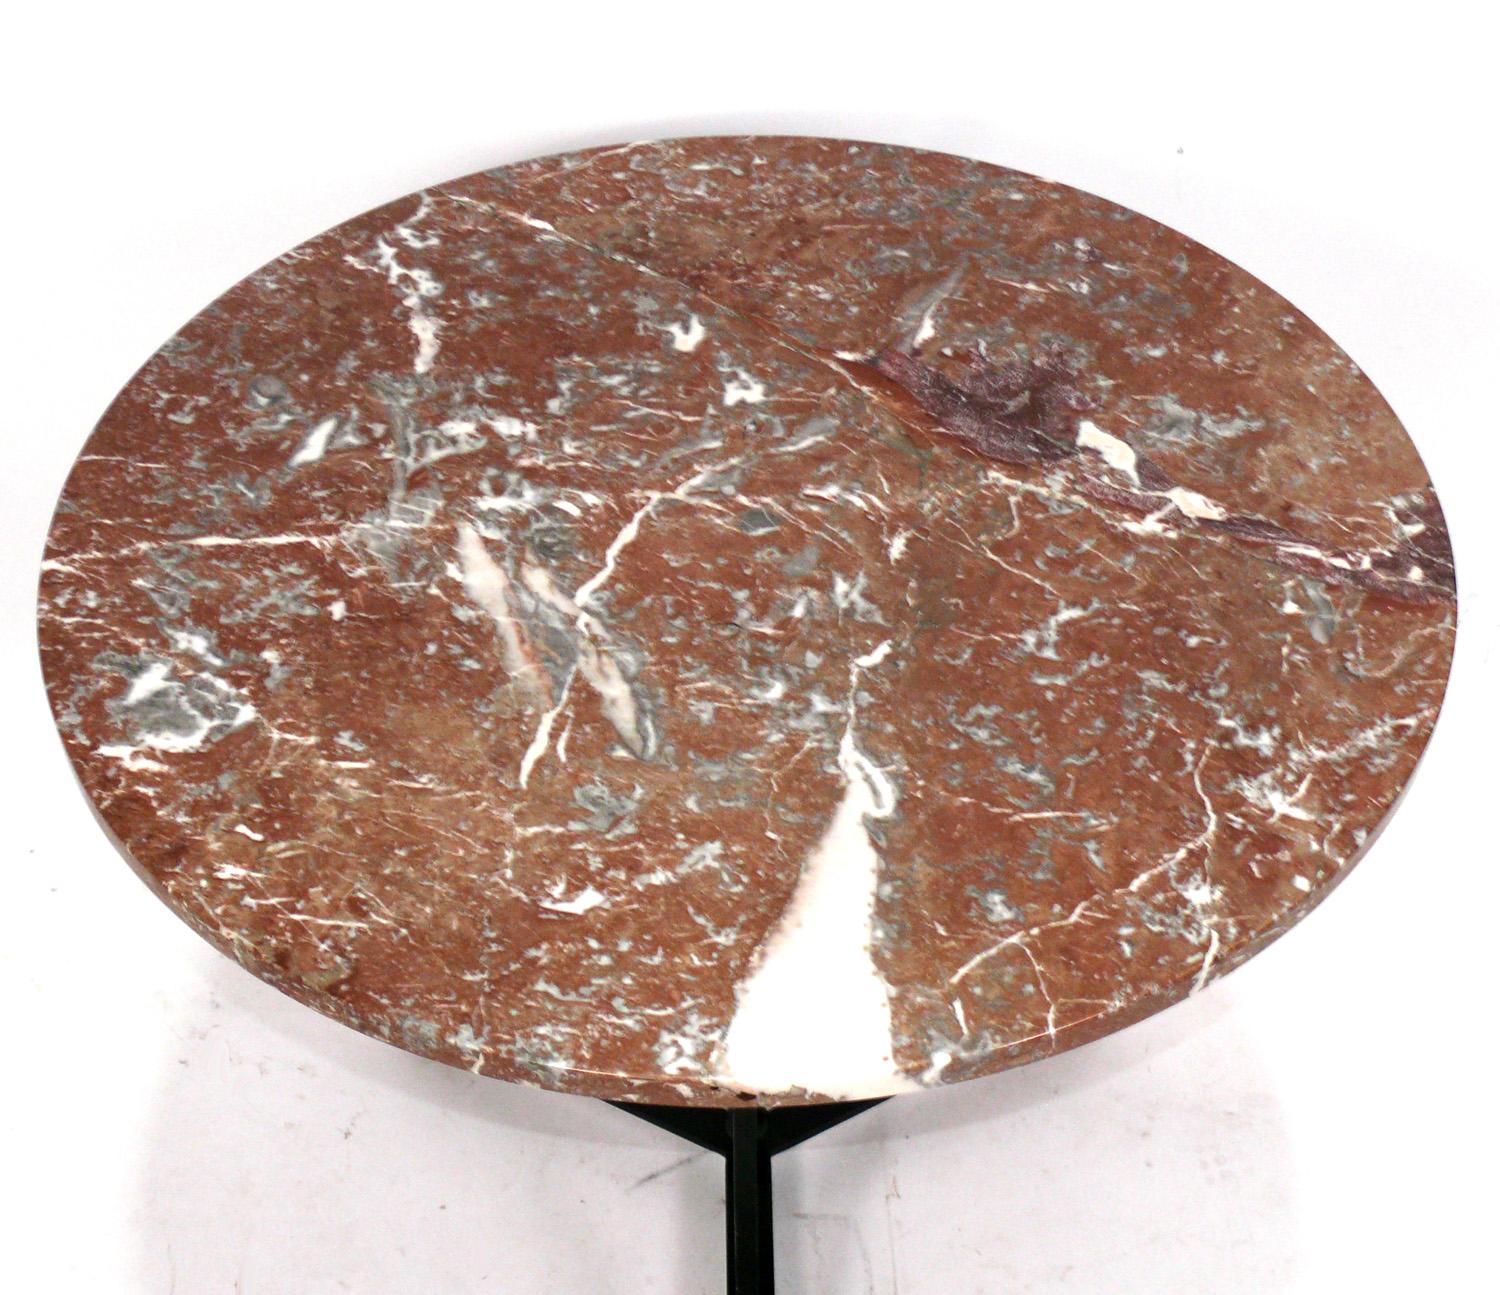 Elegant Rouge Marble and Iron Breakfast or Petite Dining Table, Italian, circa 1950s. It measures 35.25